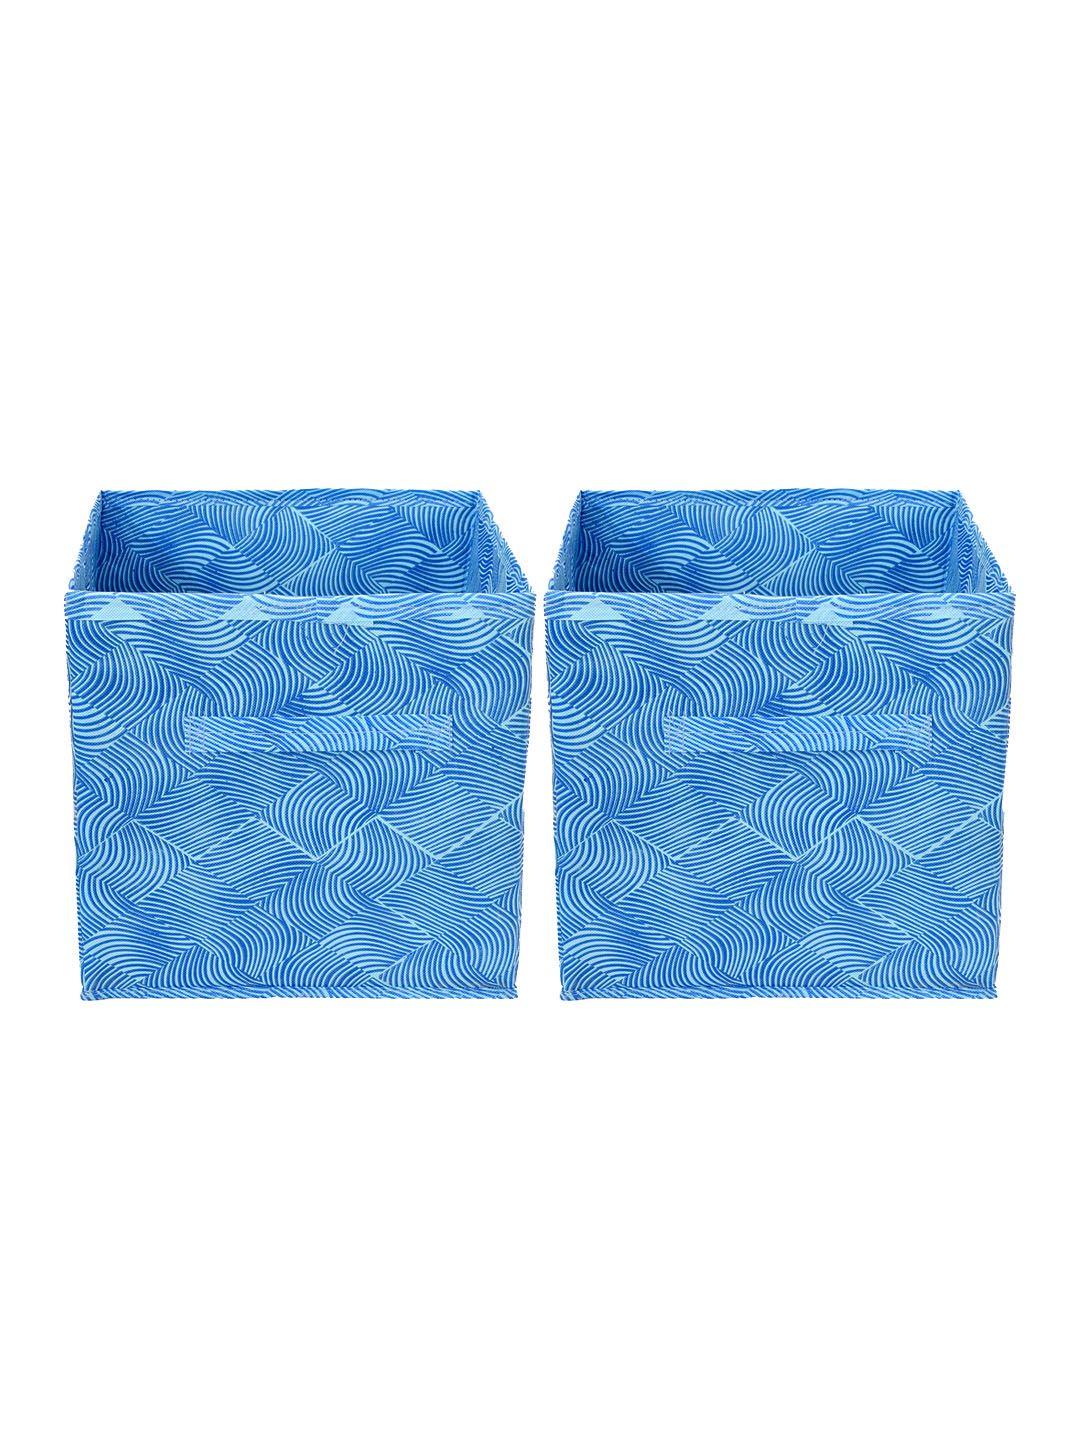 Kuber Industries Set Of 2 Blue Printed Foldable Storage Boxes With Handle Replacement Drawer Price in India